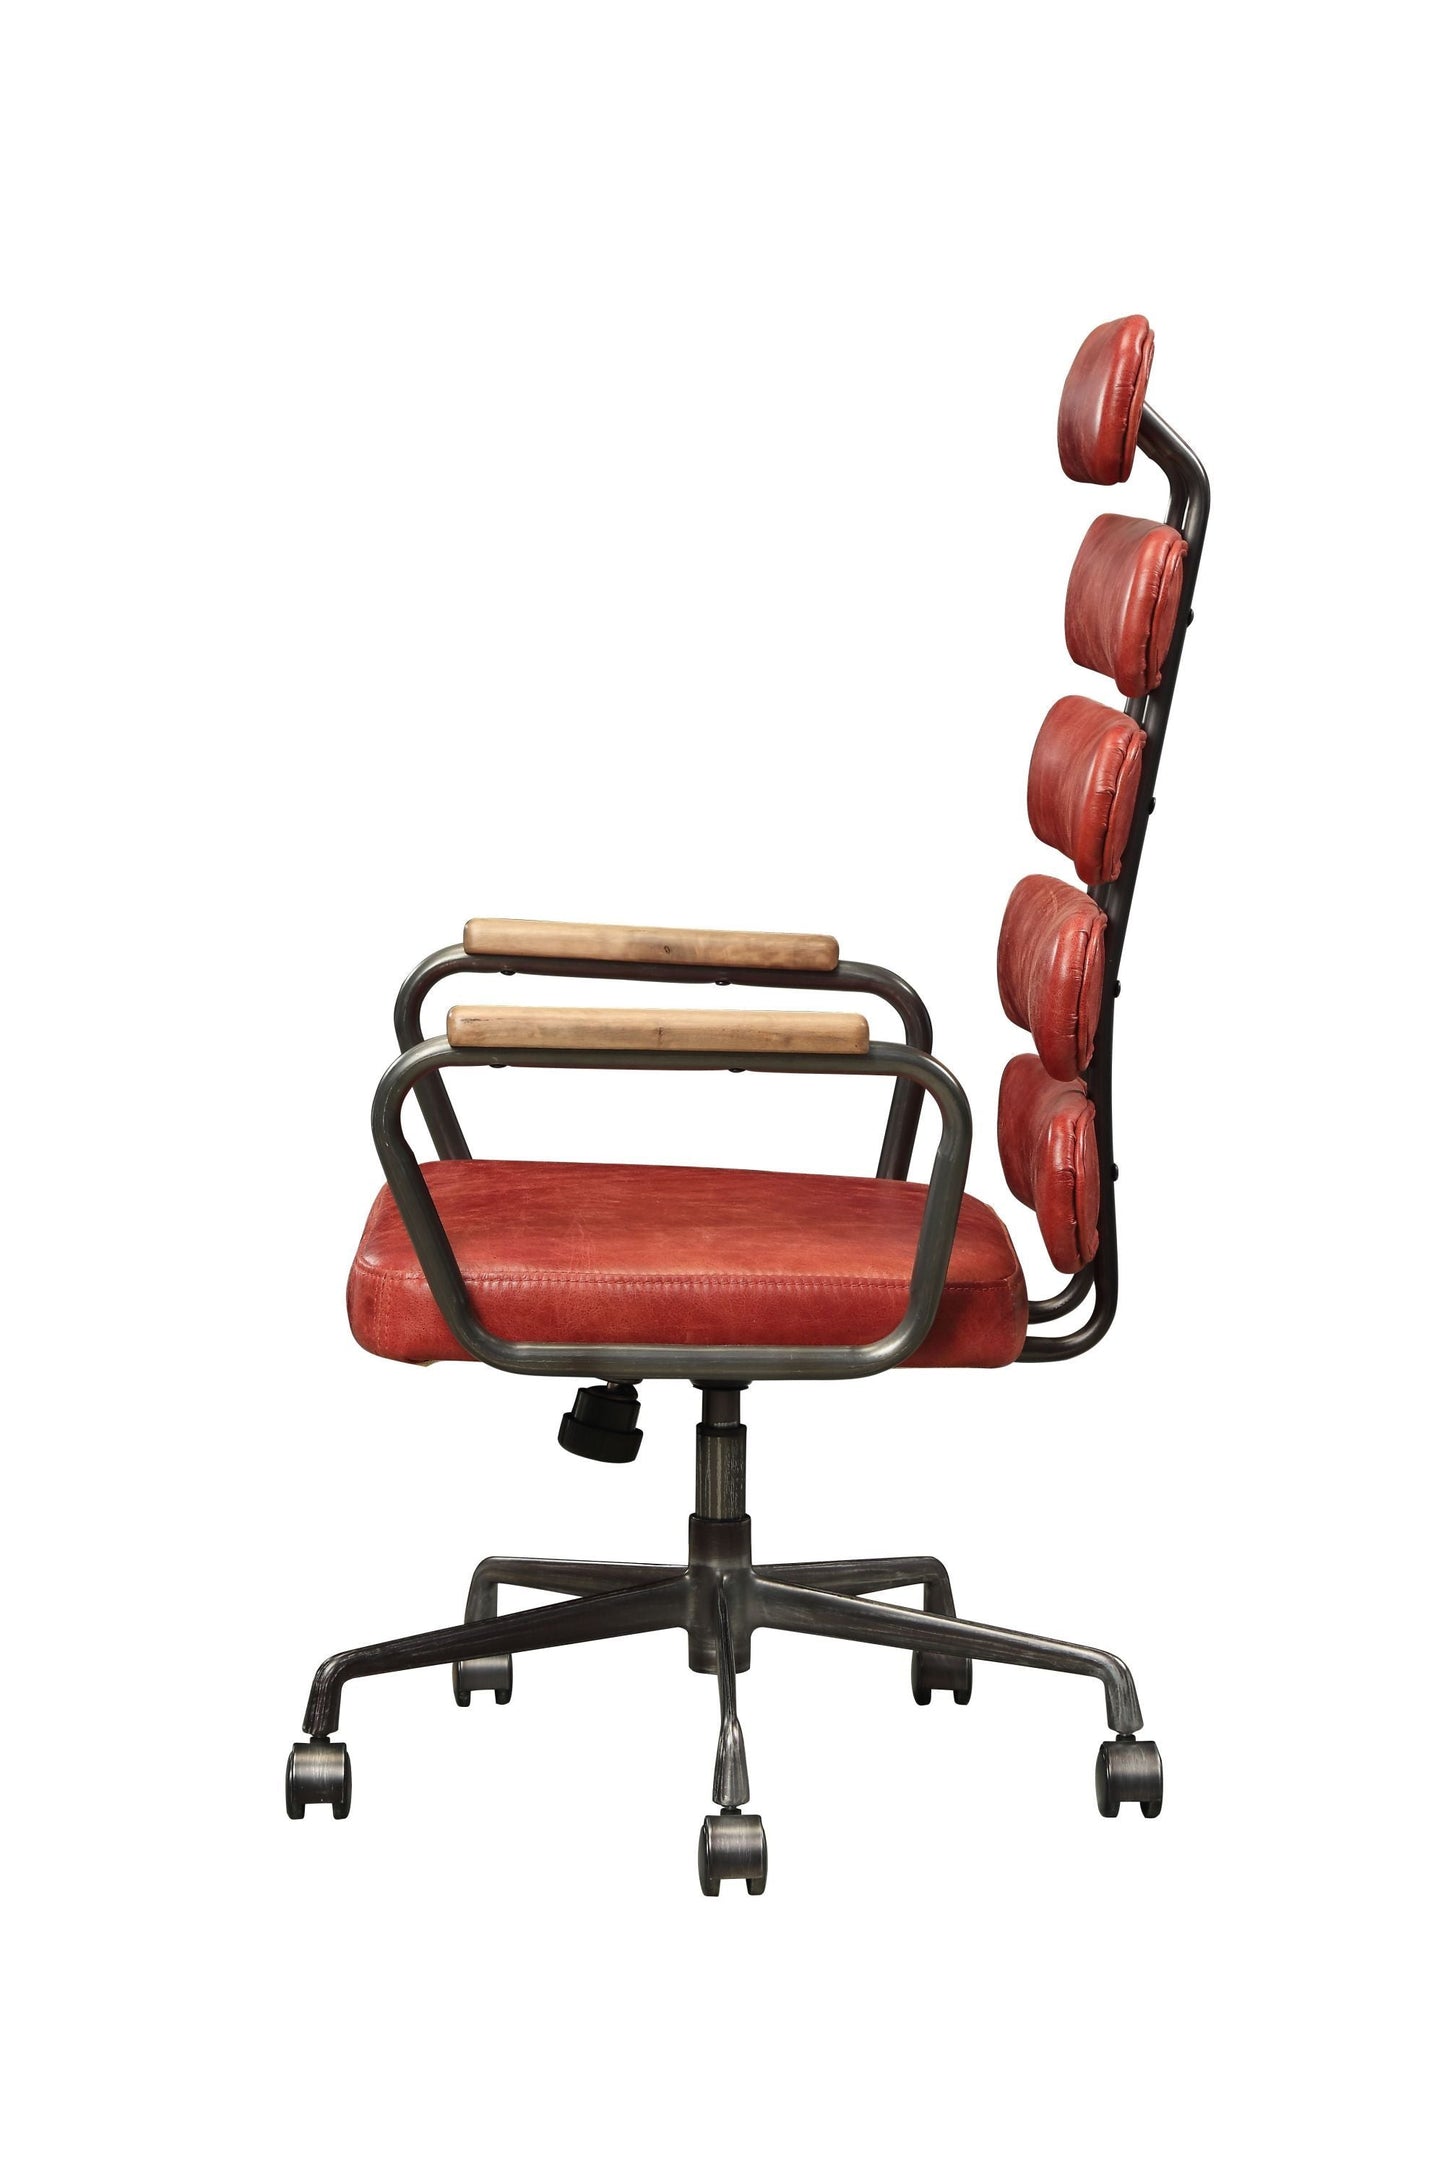 Calan Office Chair in Antique Red Top Grain Leather 92109